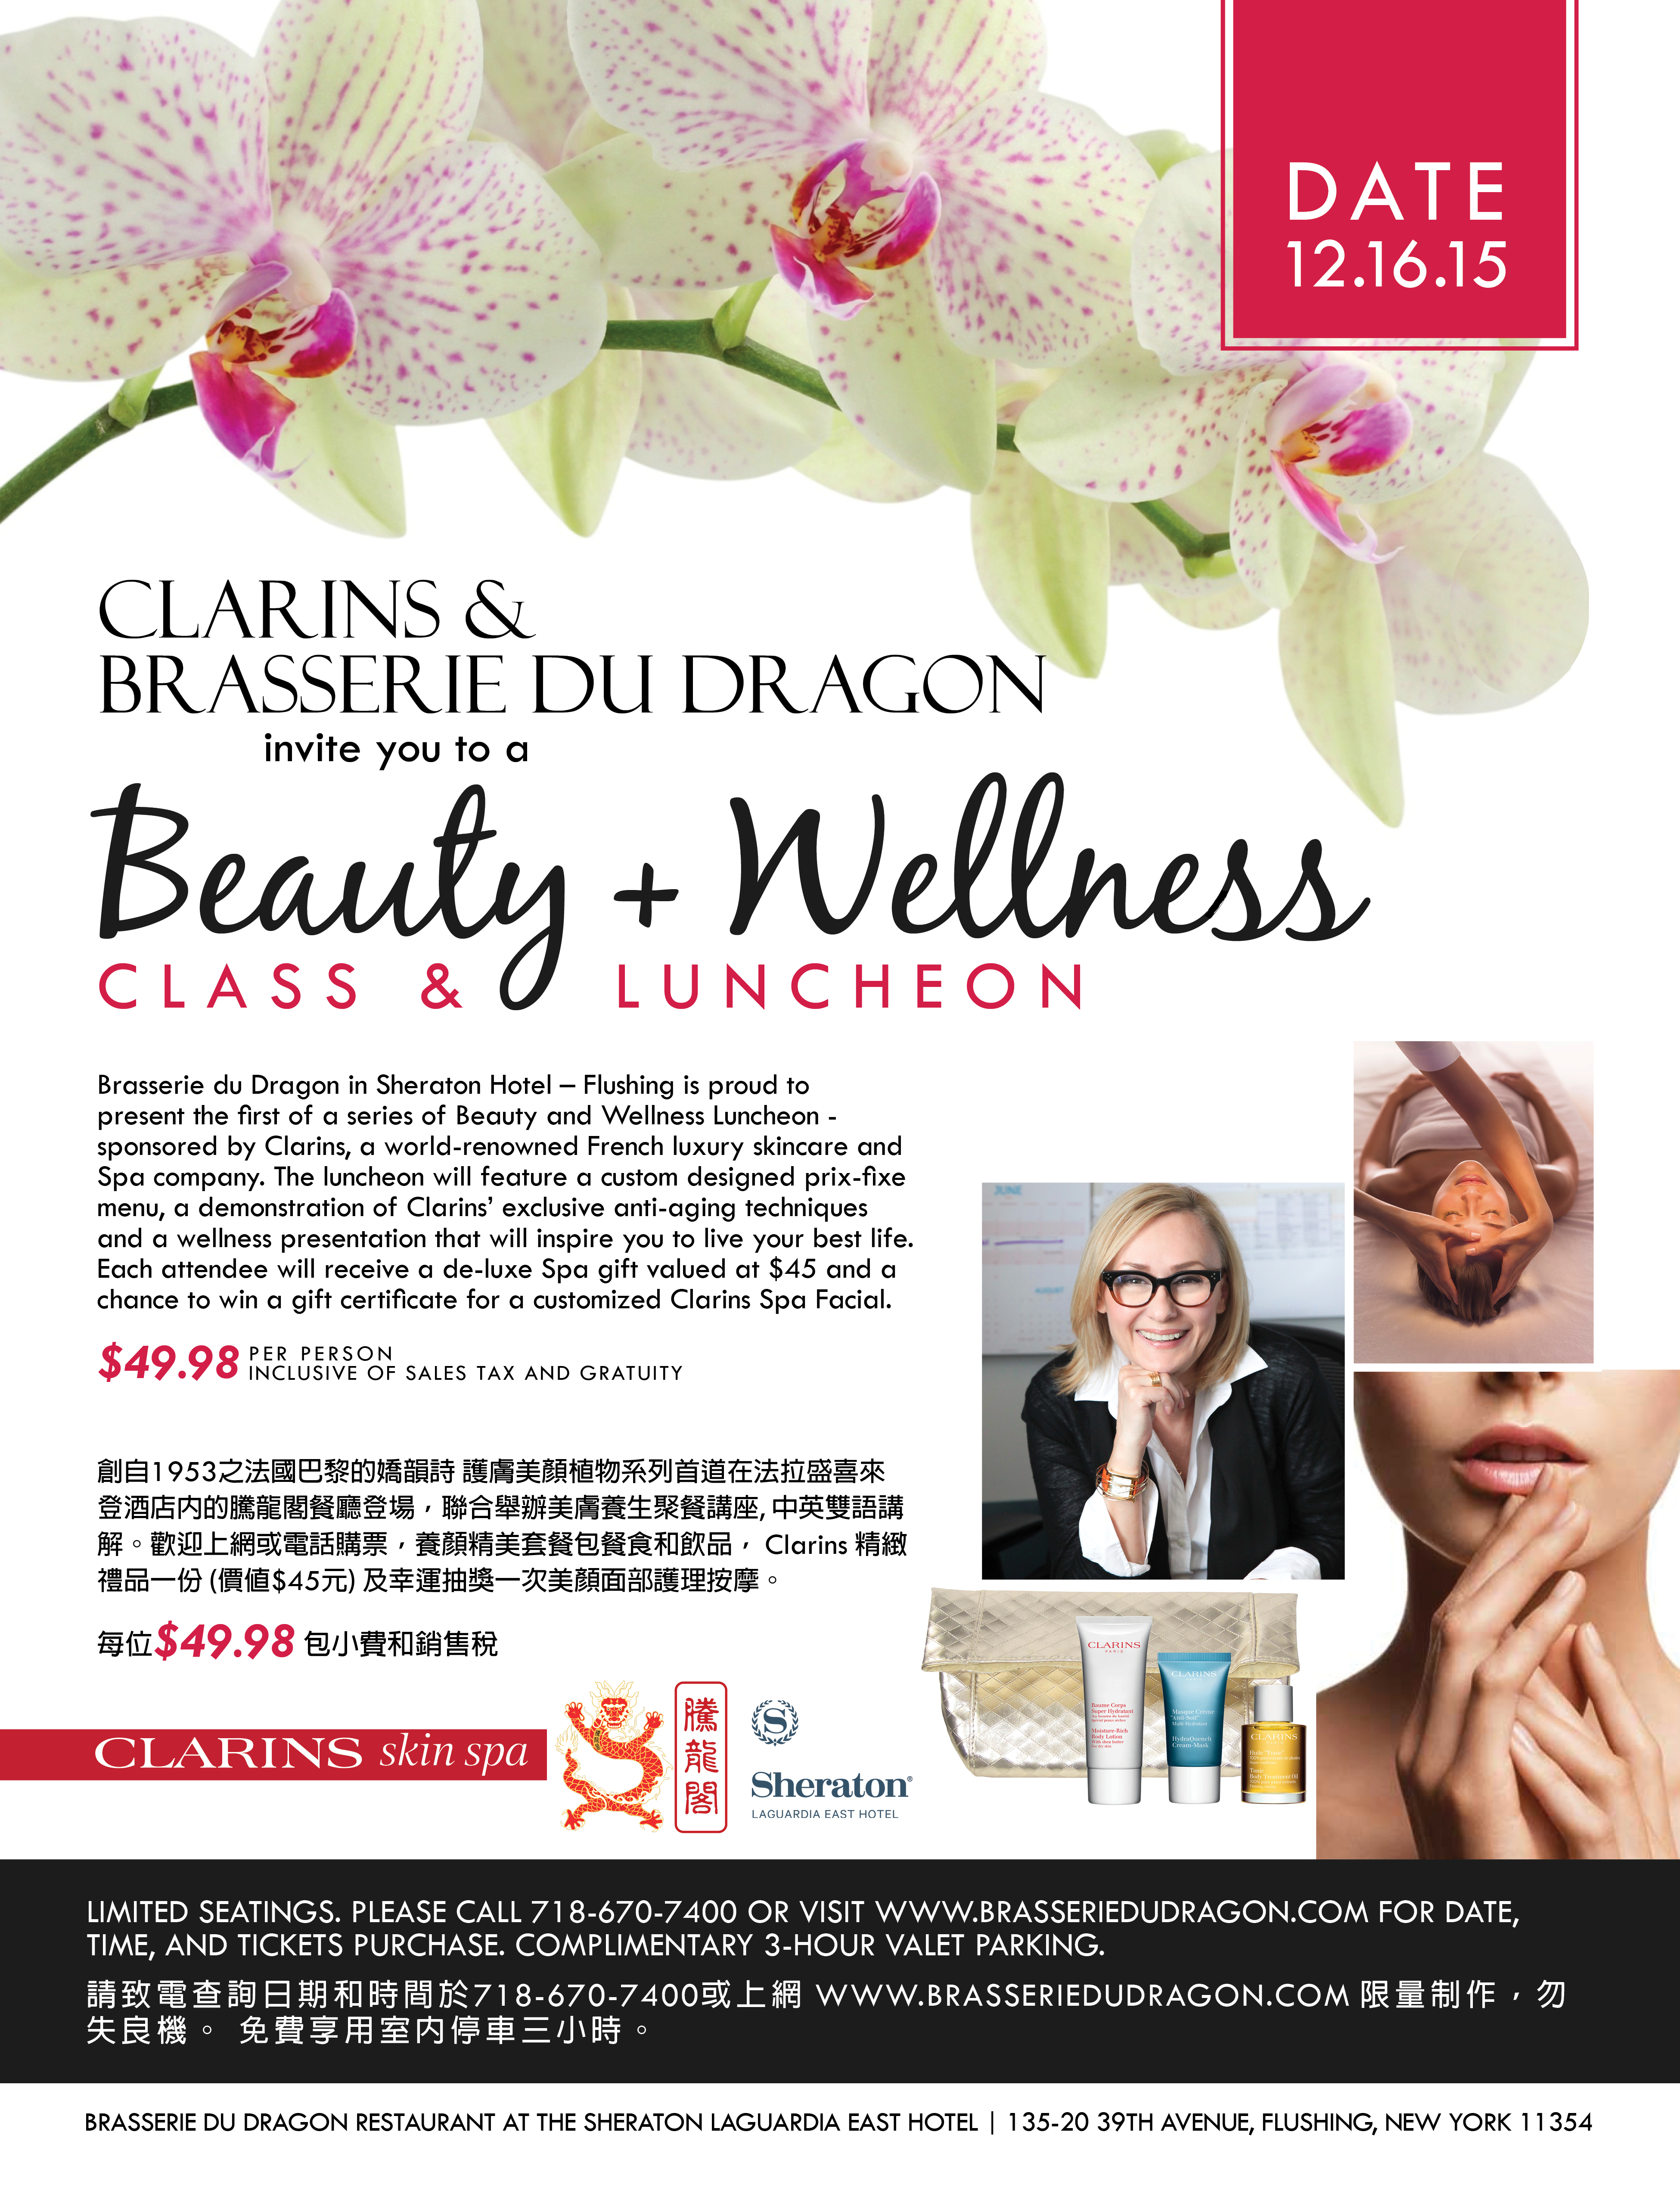 Clarins and Brasserie du Dragon invite you to a beauty and wellness class & luncheon